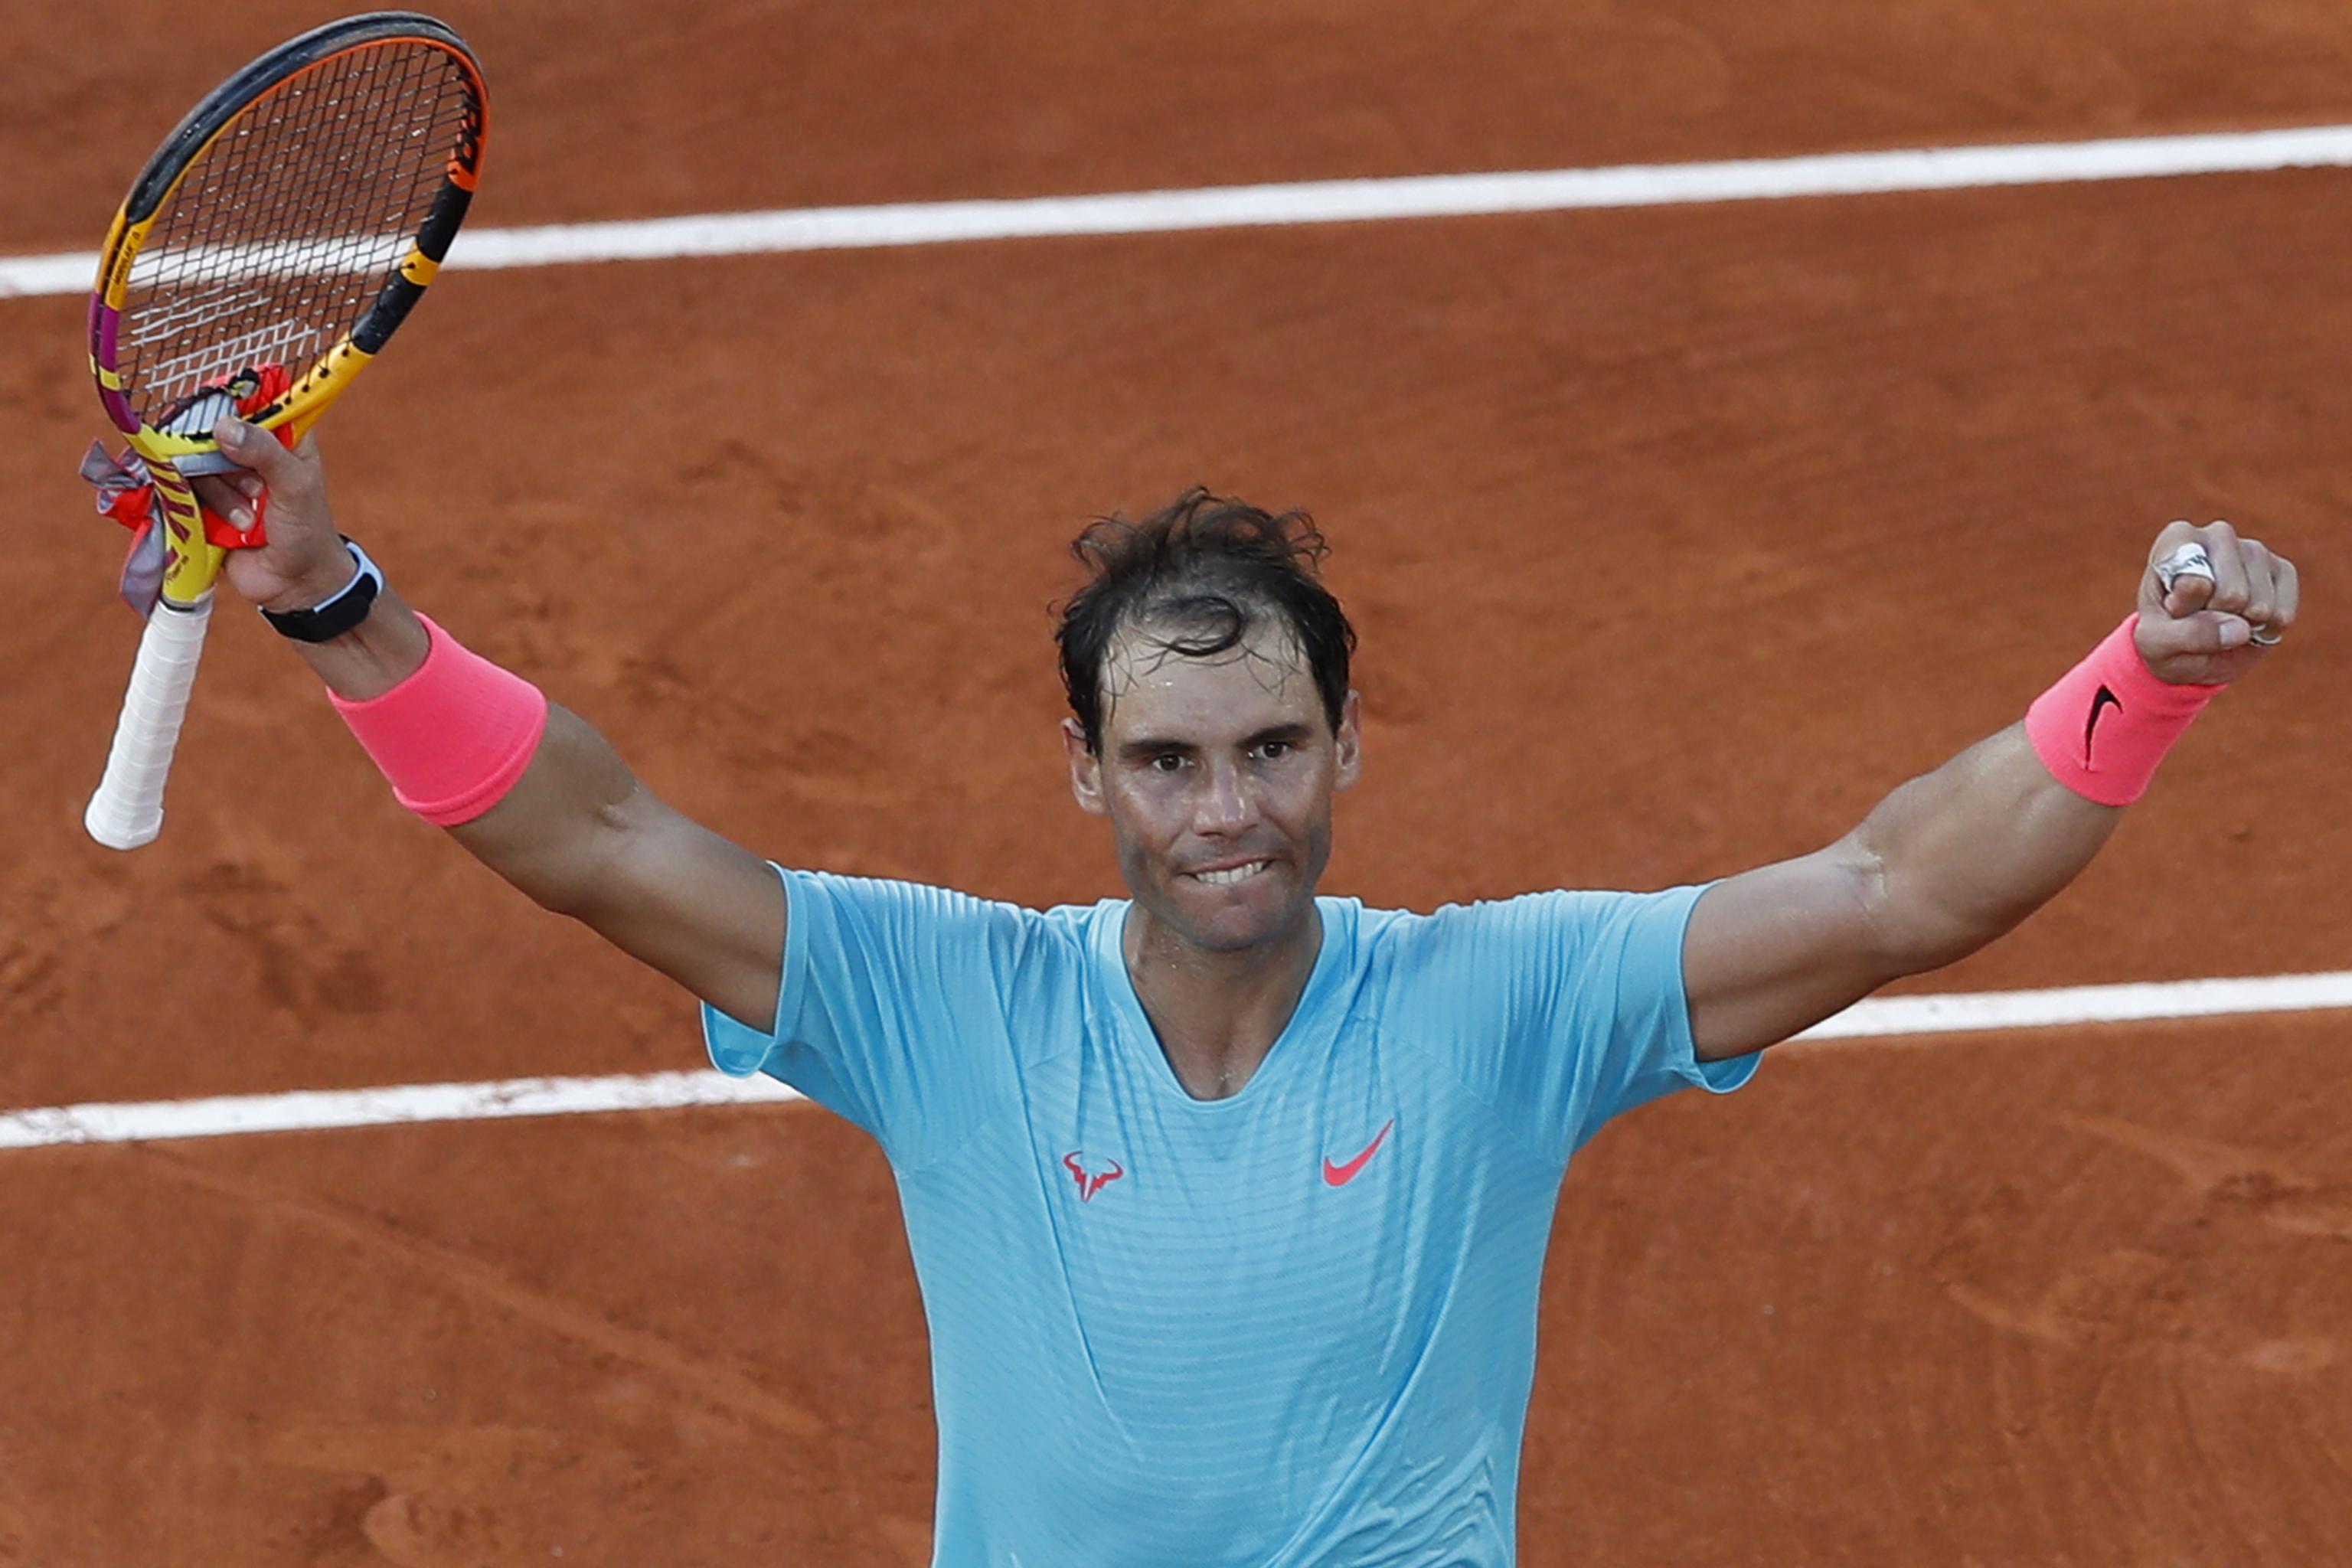 French Open 2020 Men S Final Tv Schedule Start Time And Live Stream Info Bleacher Report Latest News Videos And Highlights